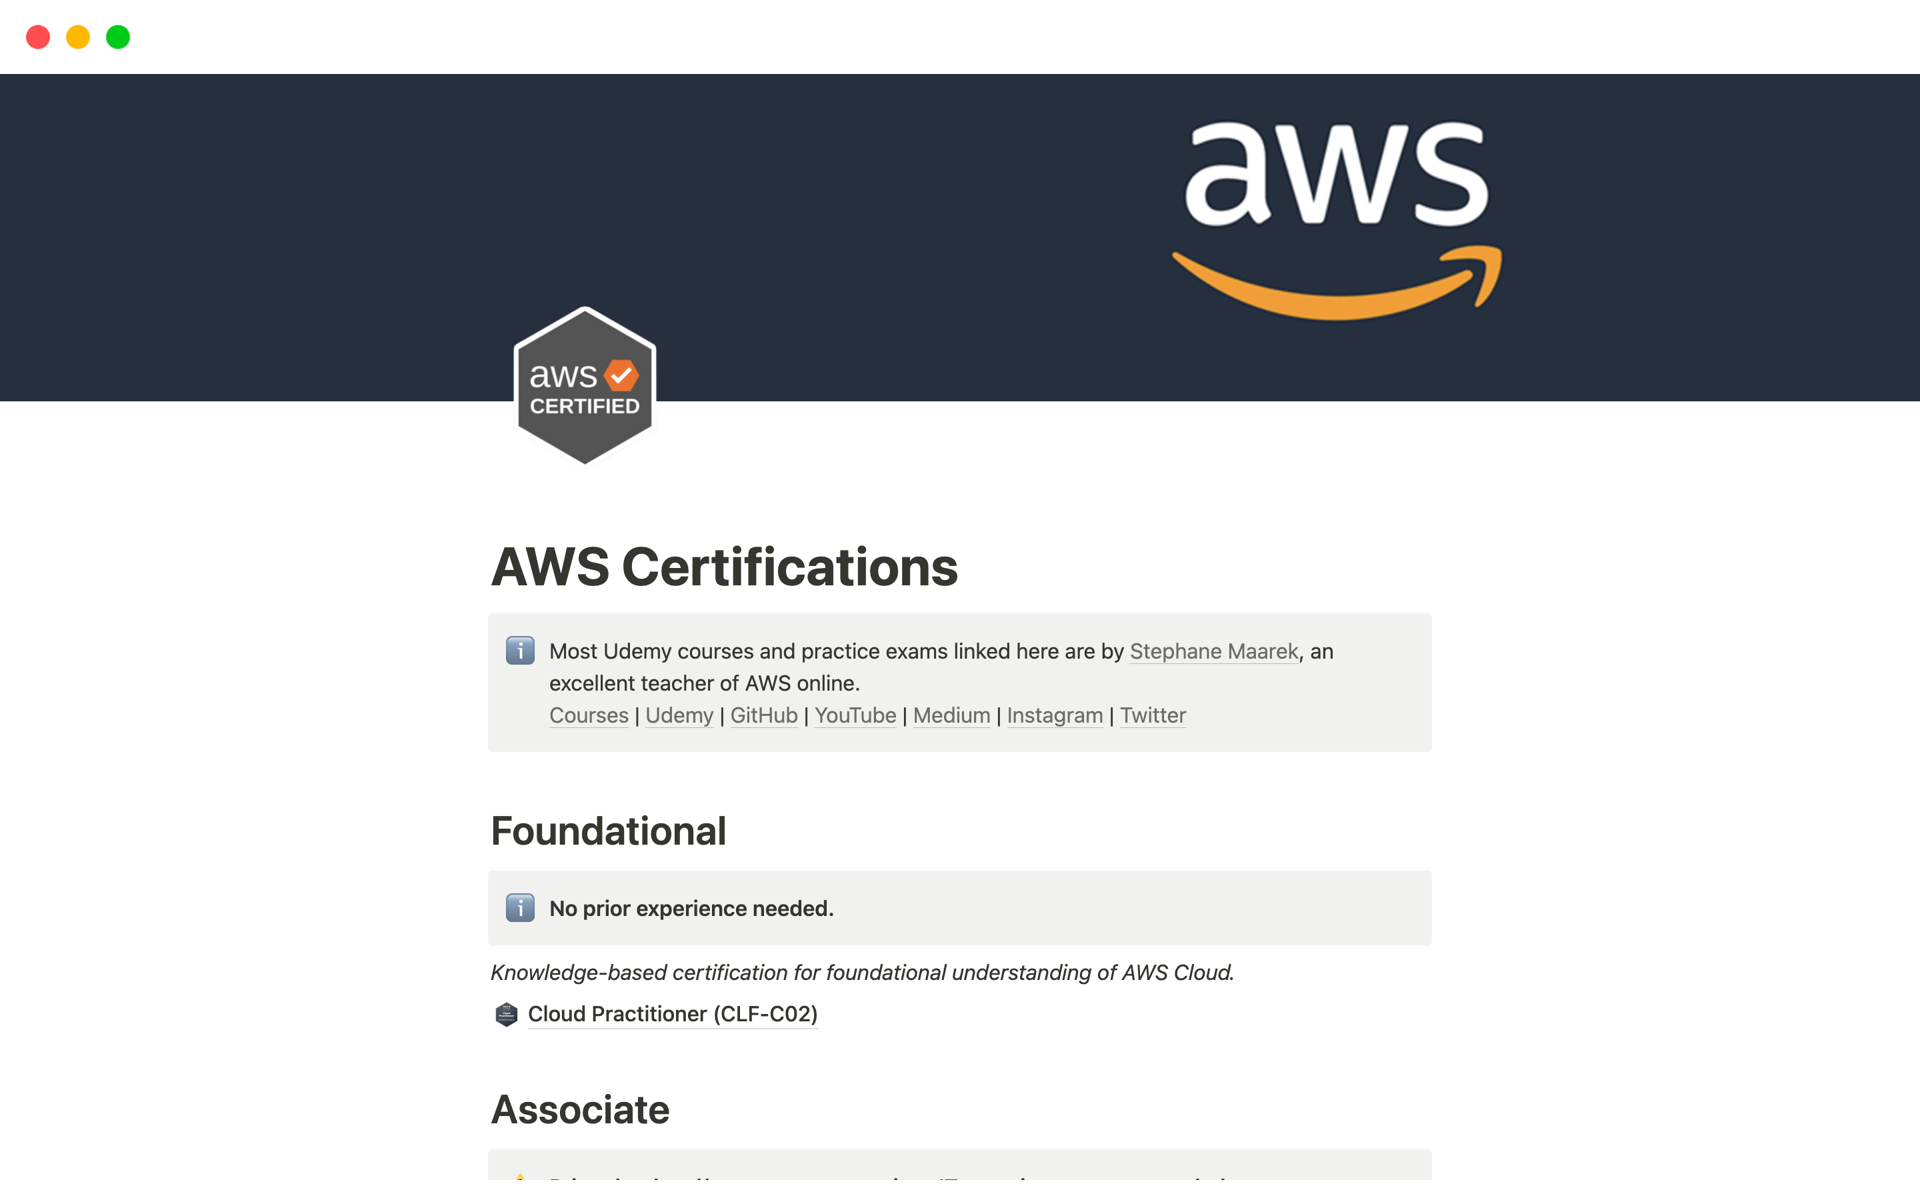 Allows you to easily track your notes when learning and preparing for AWS Certification exams.